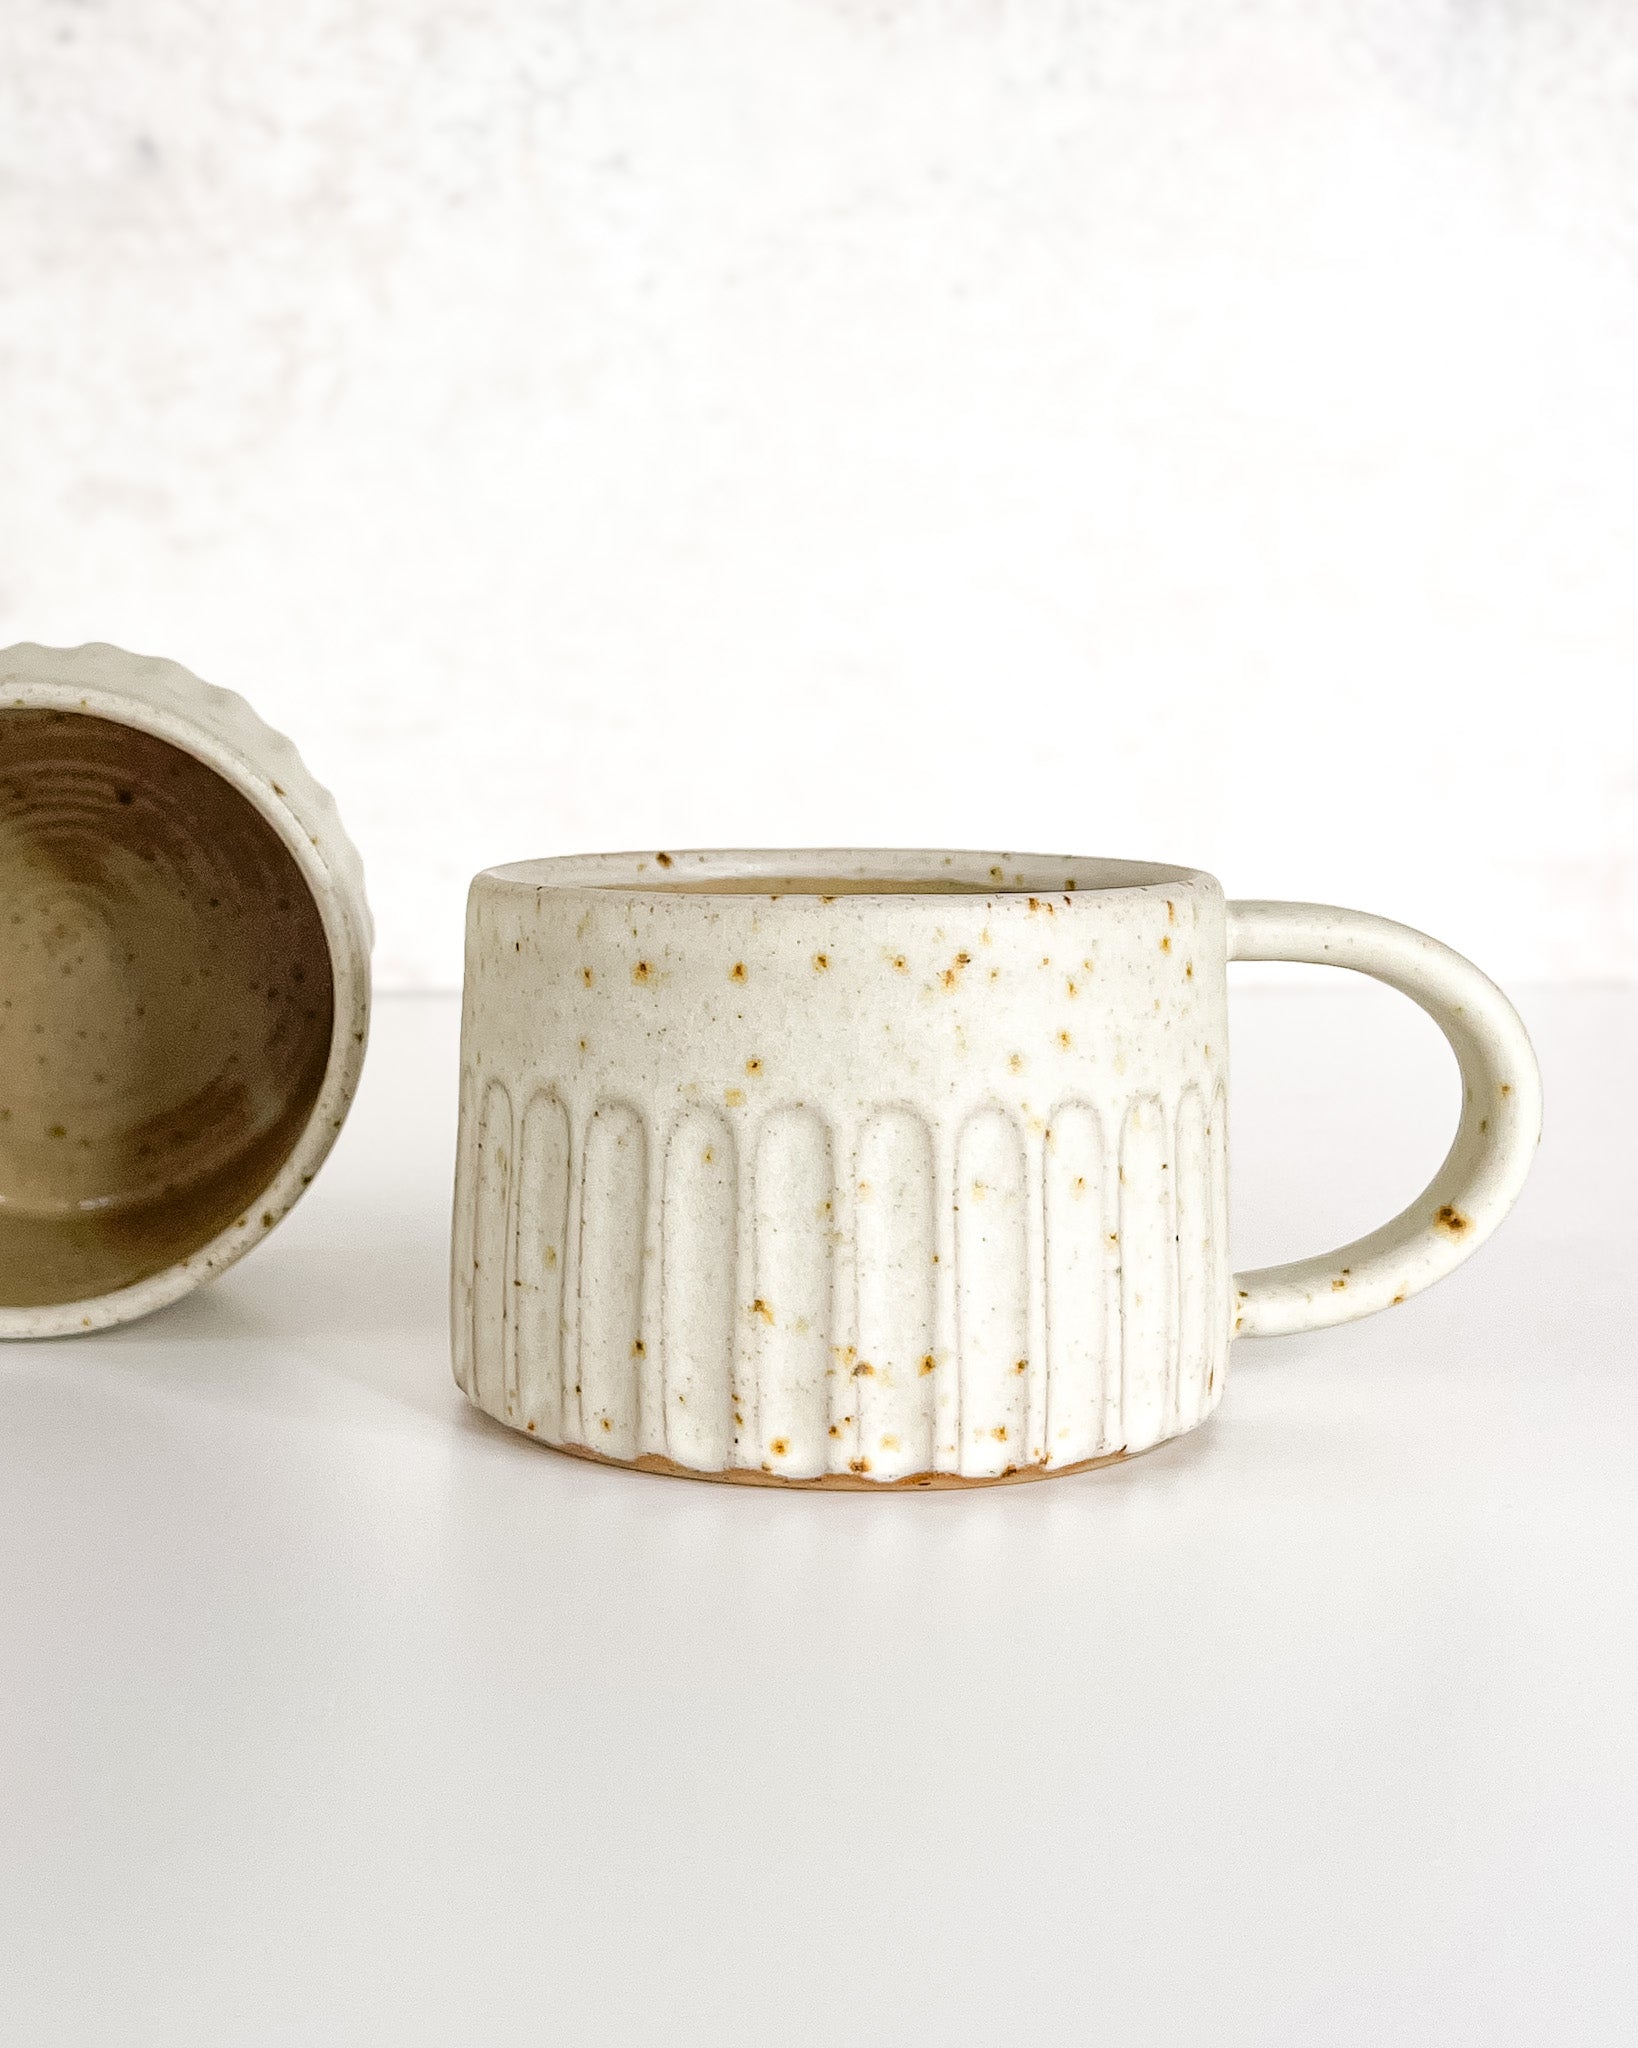 Hand-thrown carved and speckled stoneware cup with speckle glaze, ideal for coffee or tea.